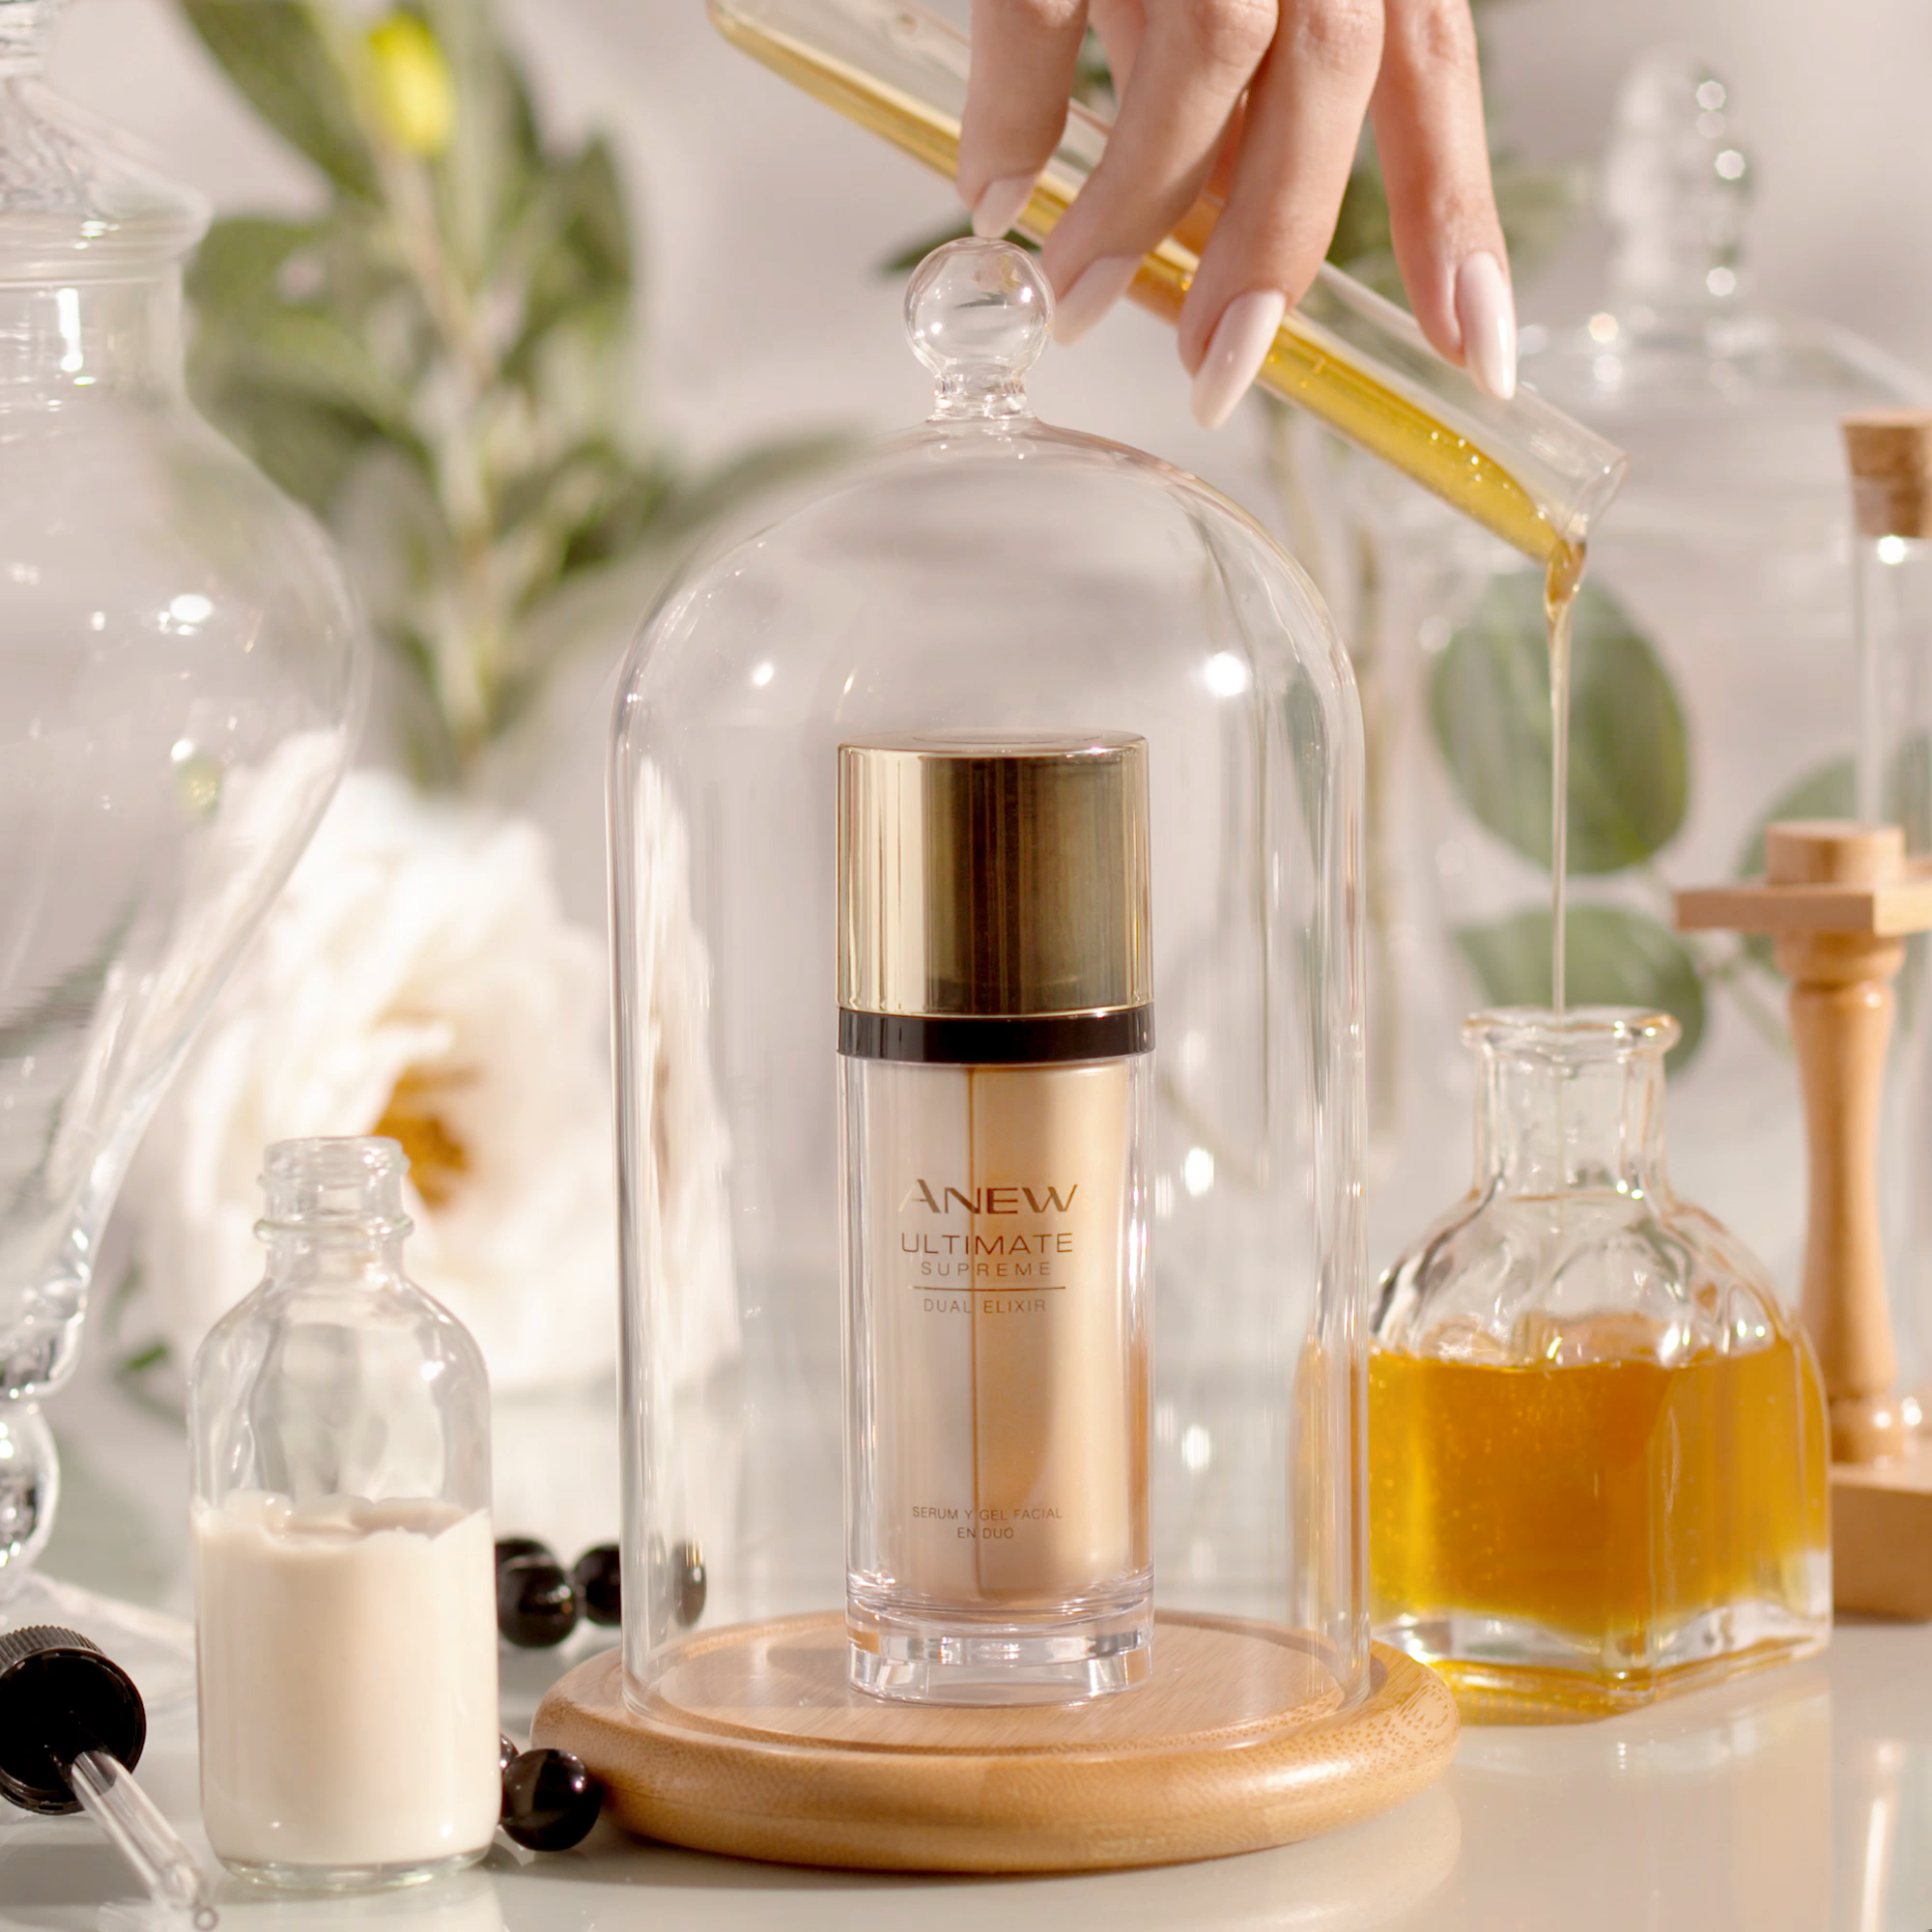 Anew Ultimate Supreme Dual Elixir -   18 skin care Photography summer ideas